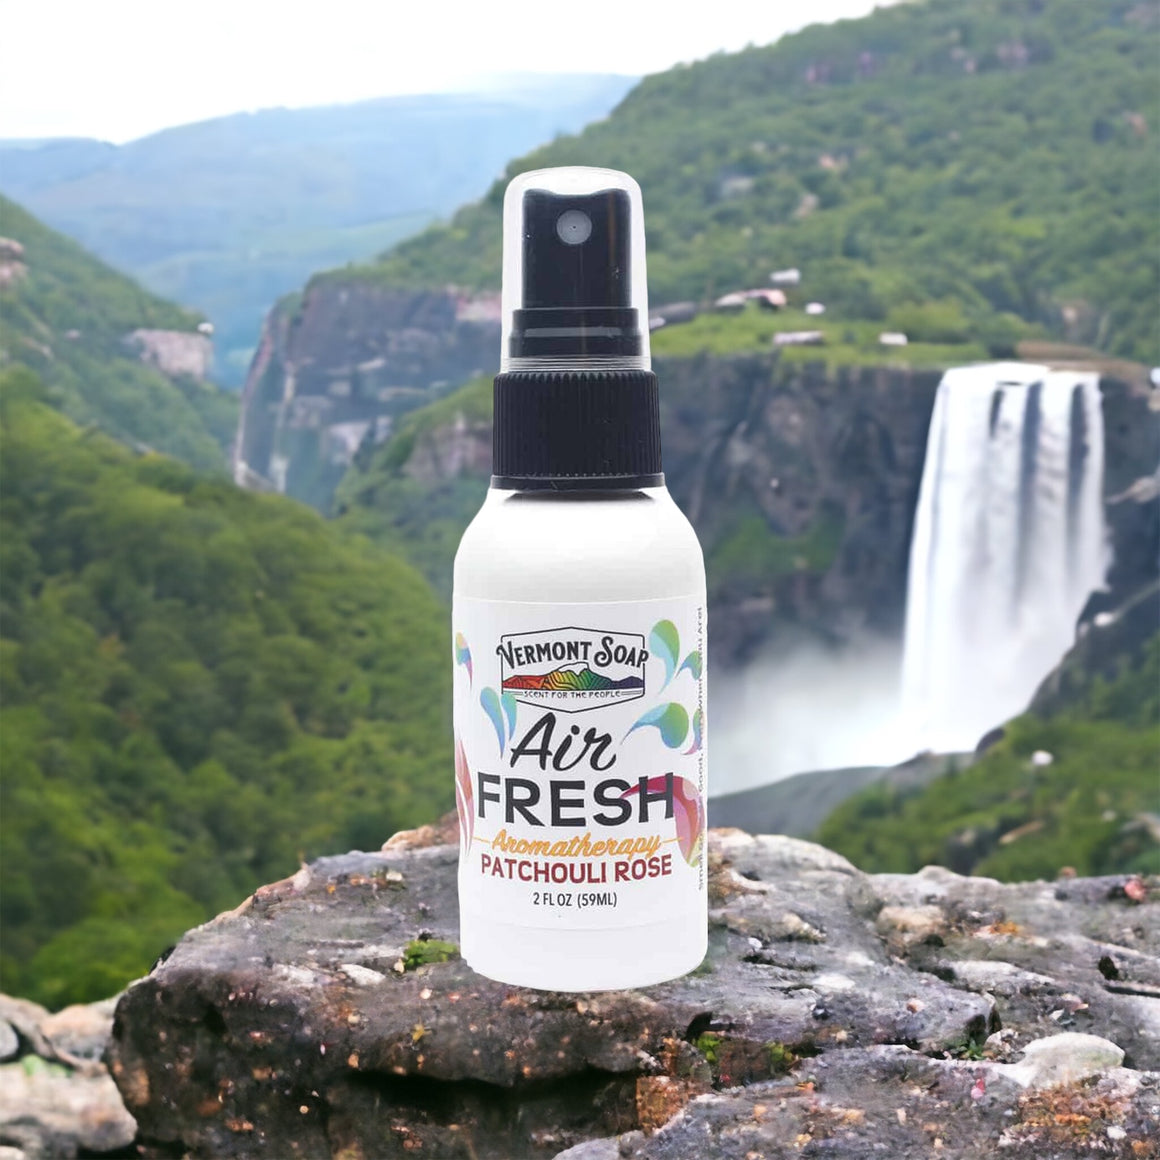 Patchouli Rose Air Fresh Aromatherapy Spray Mister - Vermont Soap